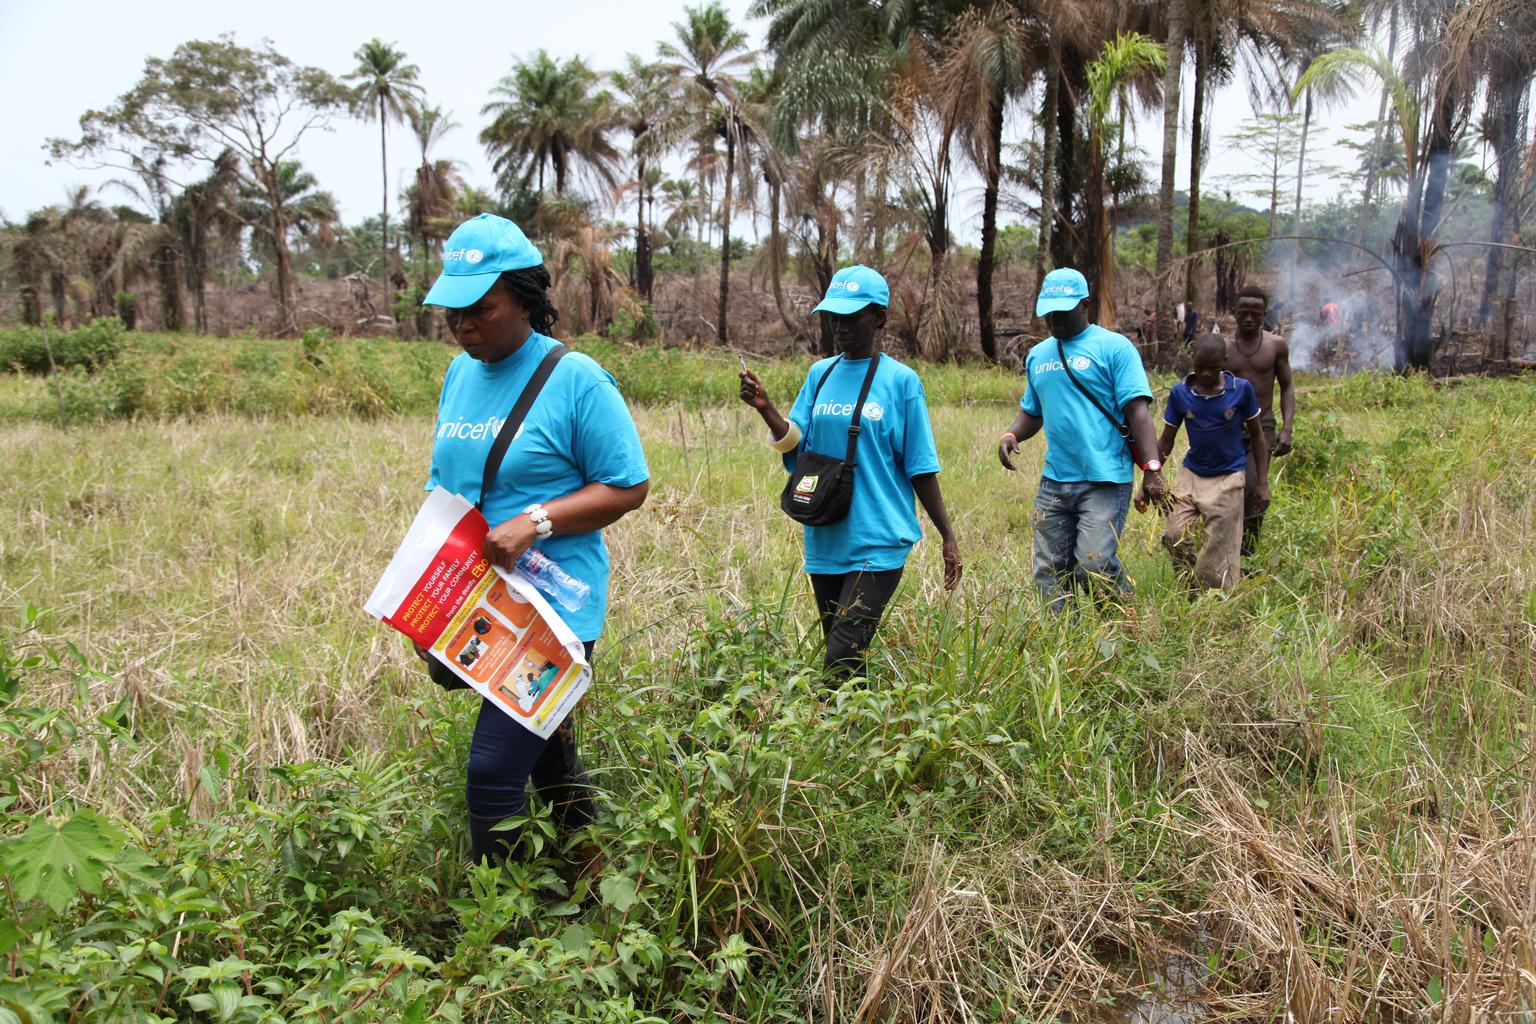 In Liberia, UNICEF workers travel by foot to reach plantation workers in a remote area, where they will share information on the symptoms of Ebola virus disease (EVD) and best practices to help prevent its spread,